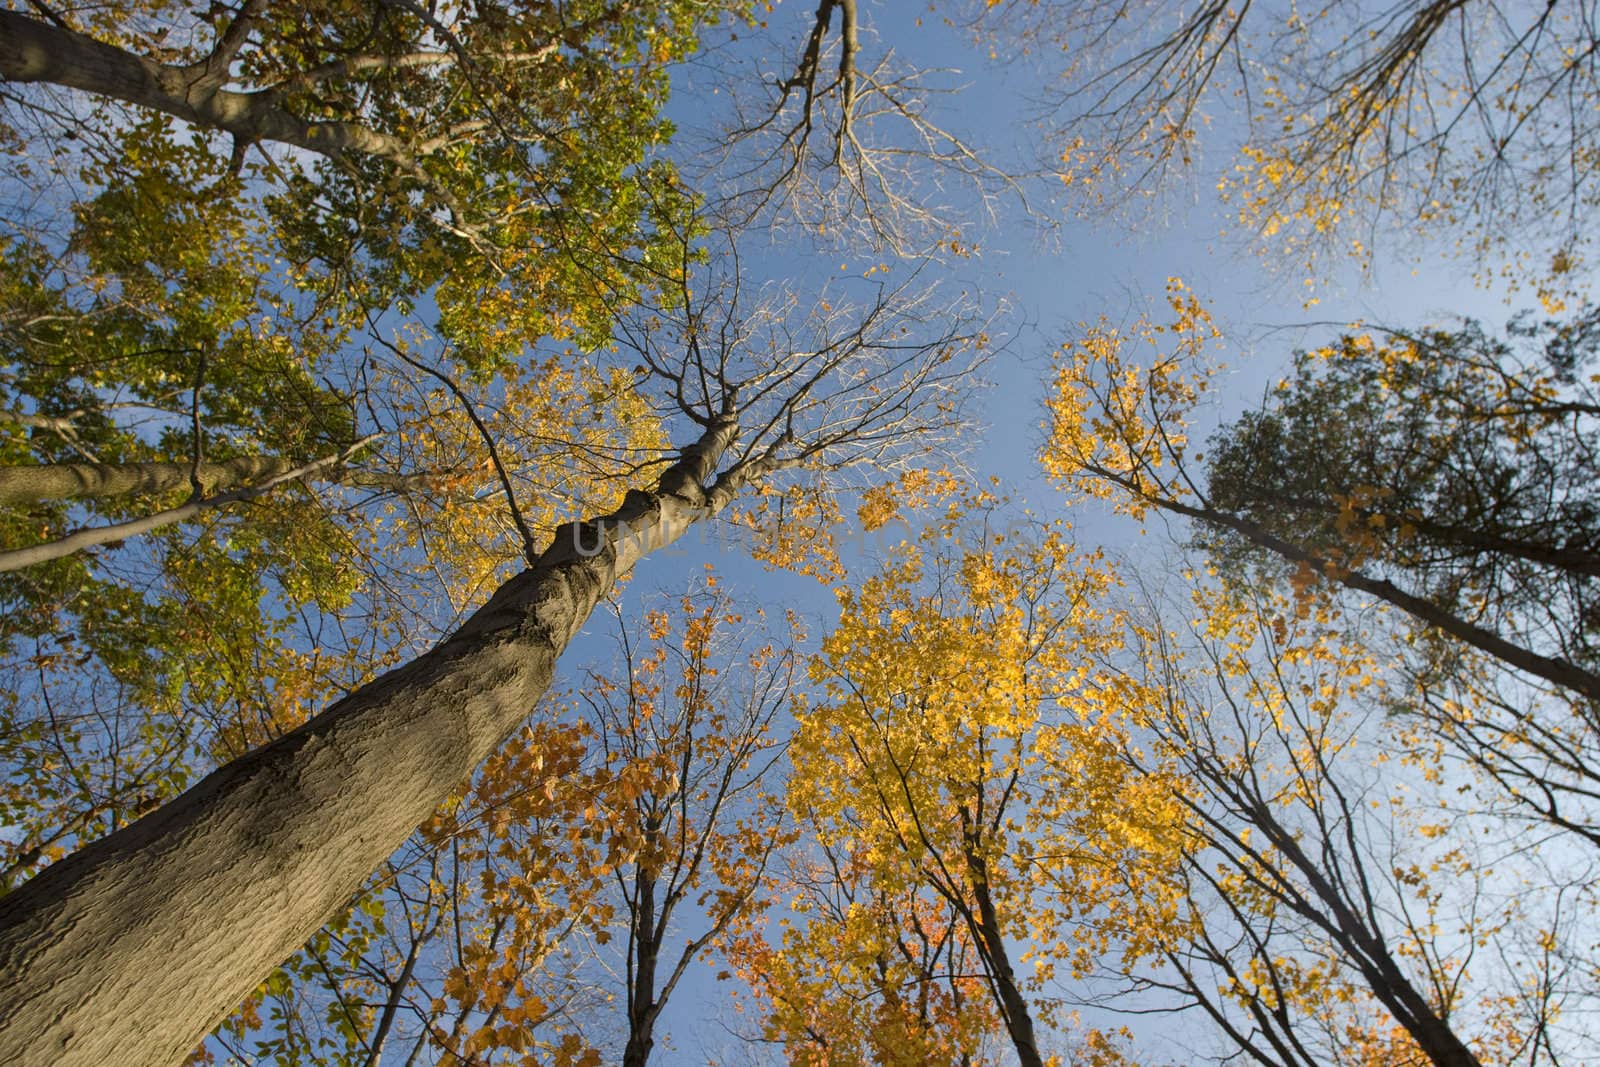 Wide angle photo looking up into the almost bare autumn treetops